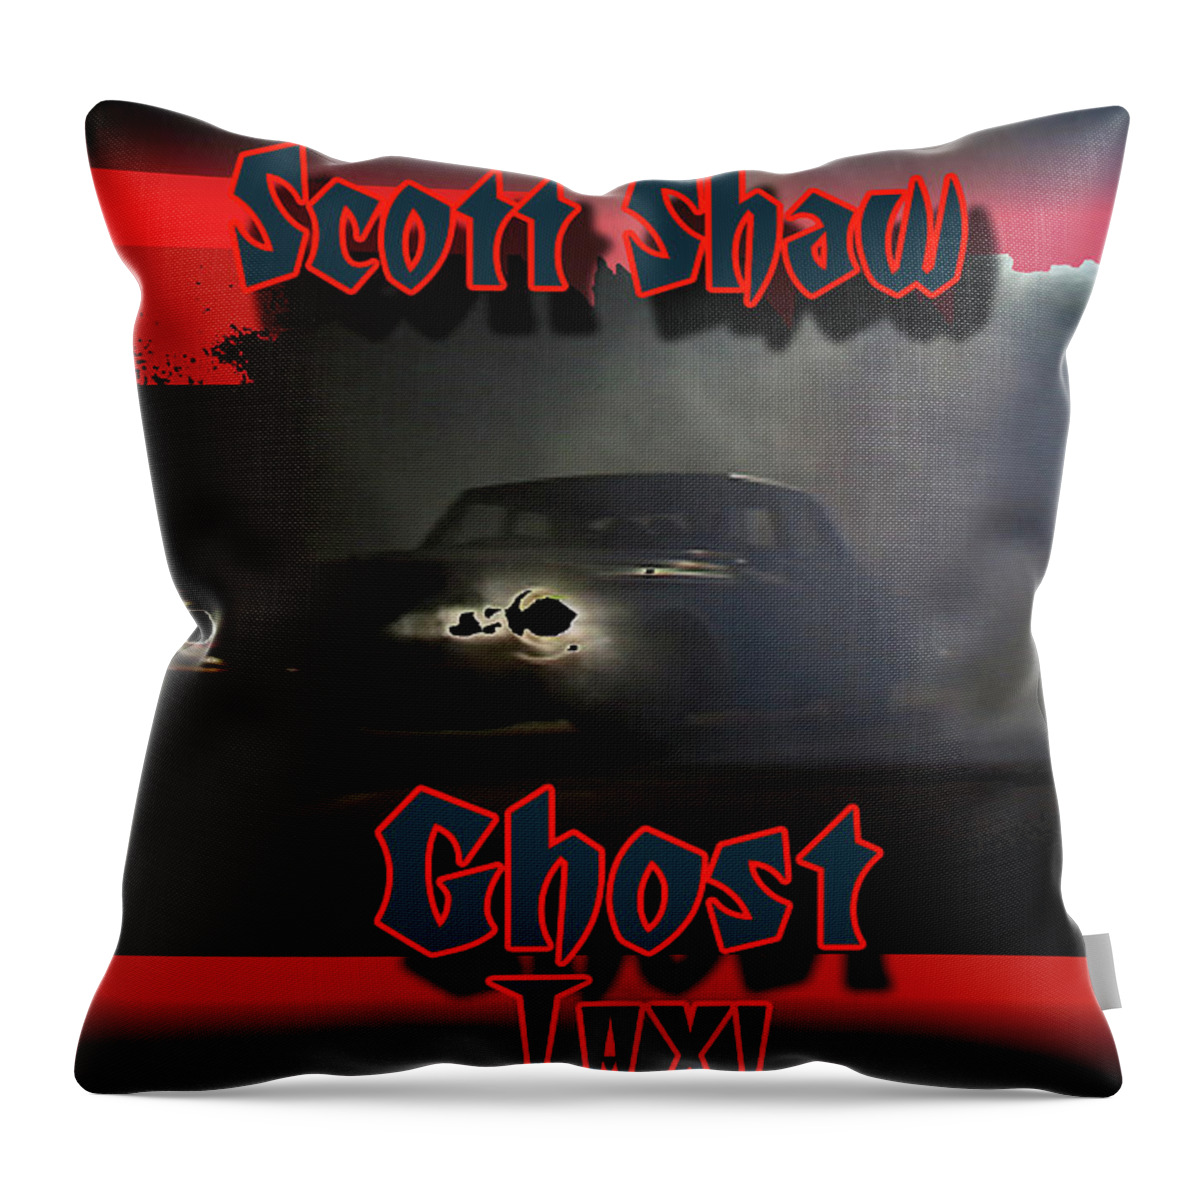 Ghost Taxi Throw Pillow featuring the photograph Ghost Taxi by The Zen Filmmaking Store